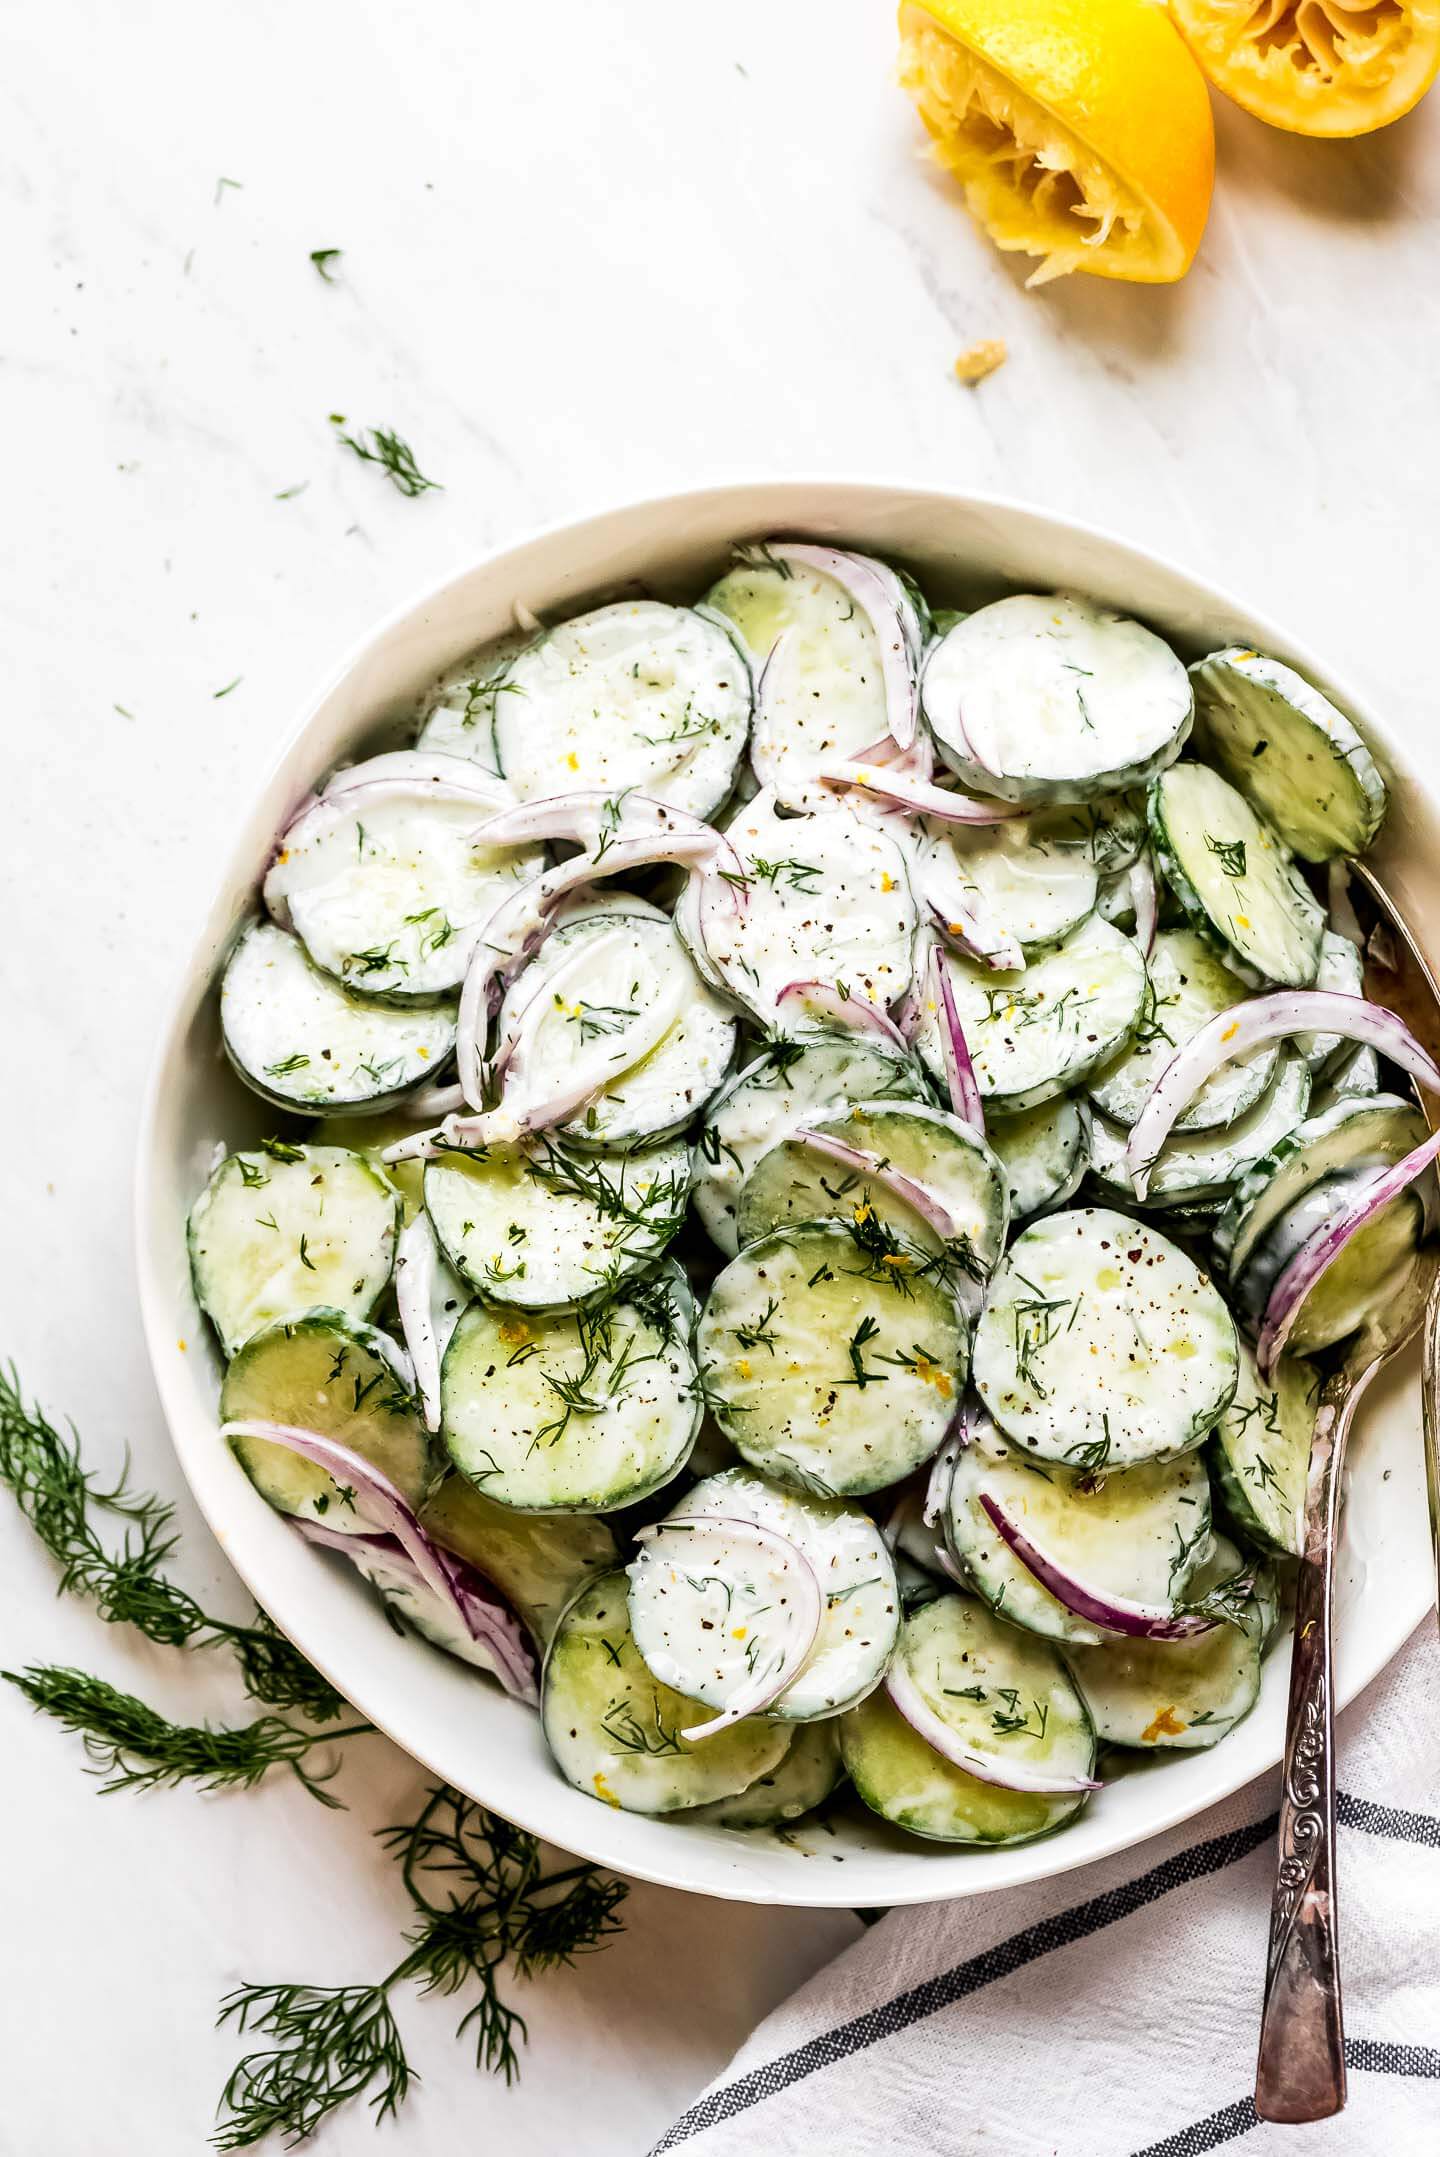 Sliced cucumbers and red onion slices in a bowl coated with a creamy sauce, fresh dill, lemon zest, and salt and pepper.